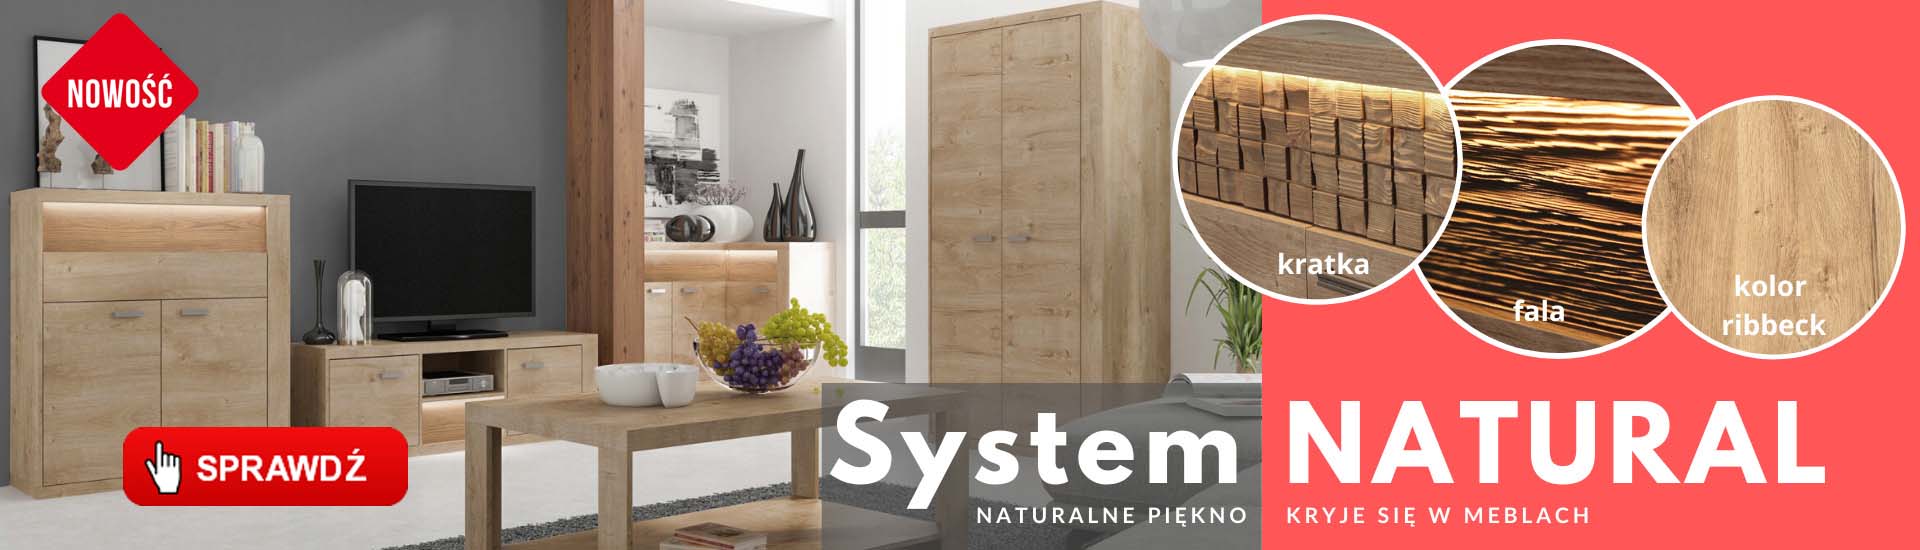 System NATURAL